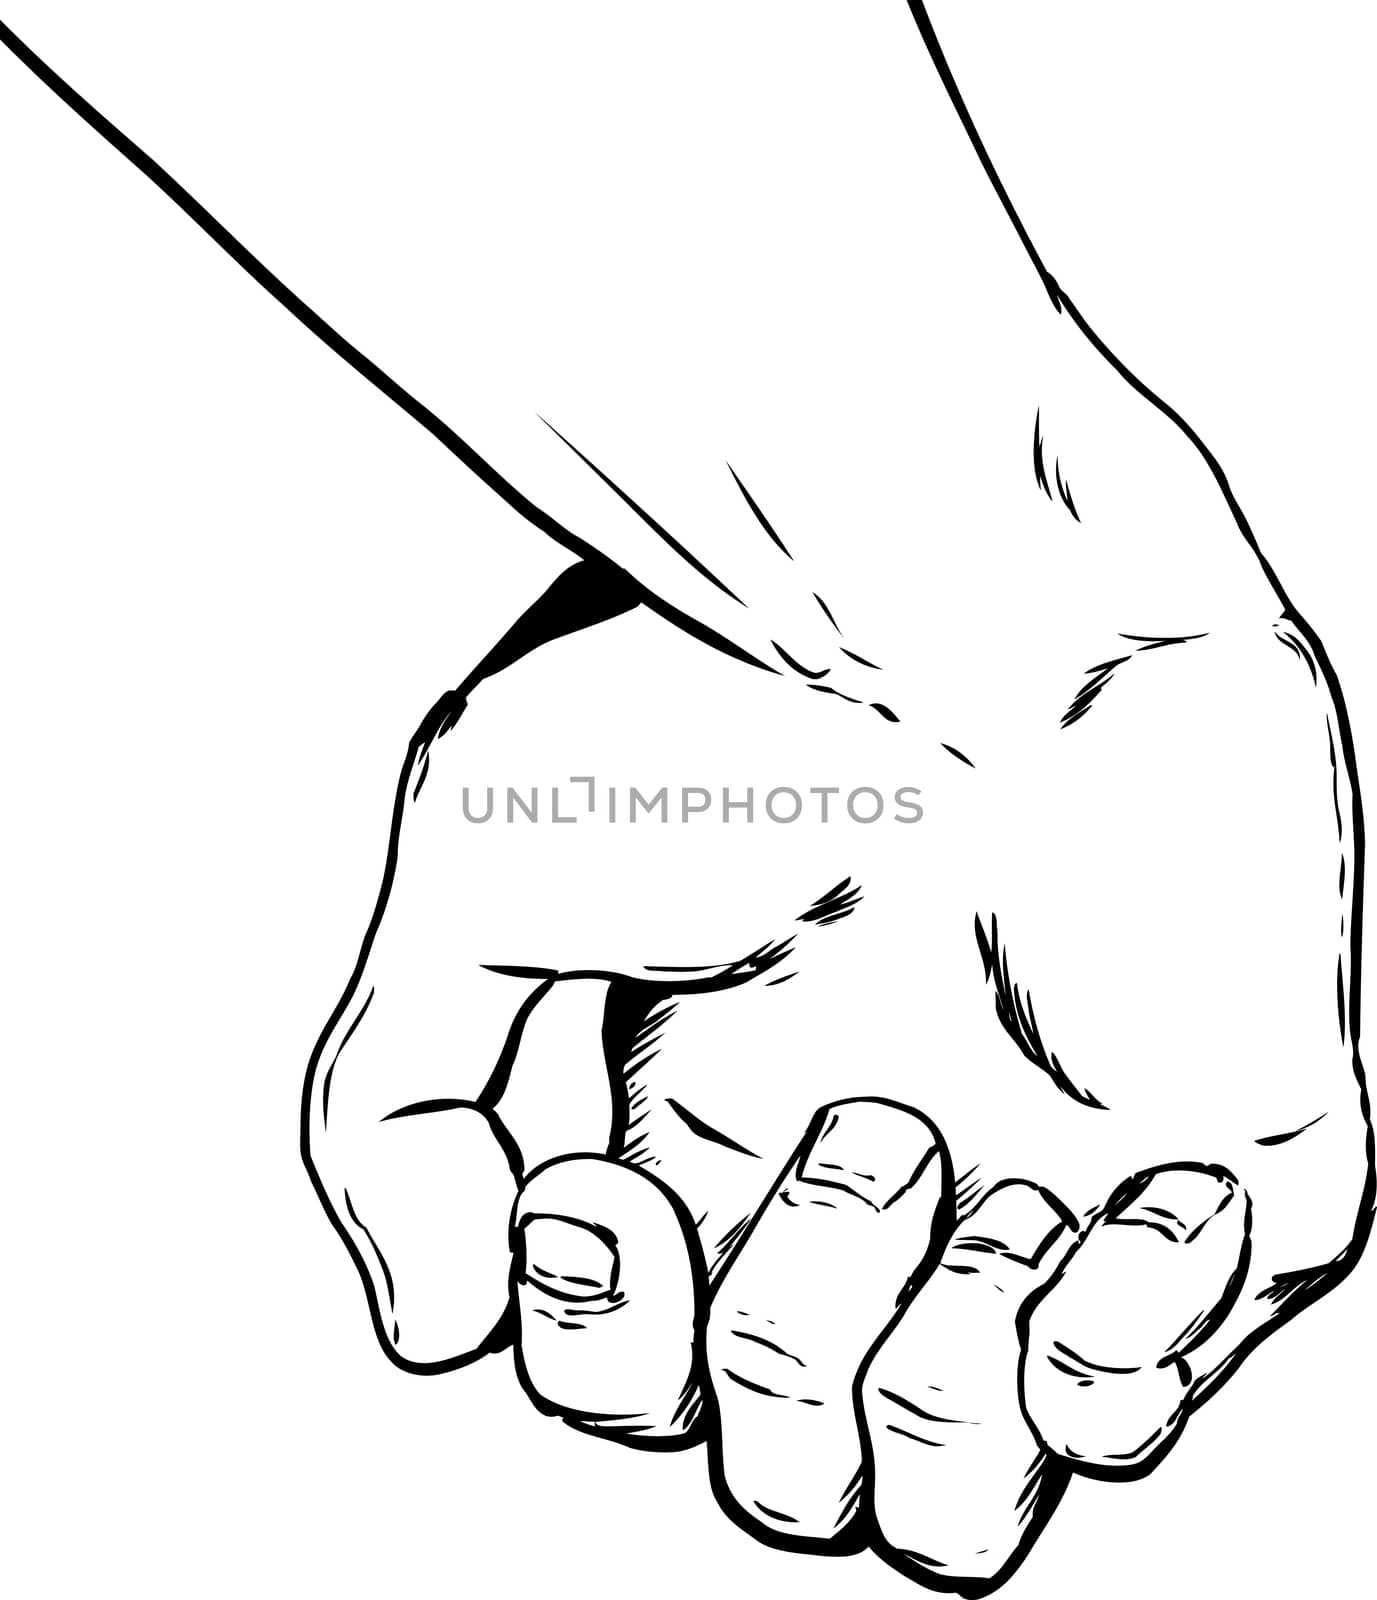 Outline illustration of inside of partially open empty hand holding something